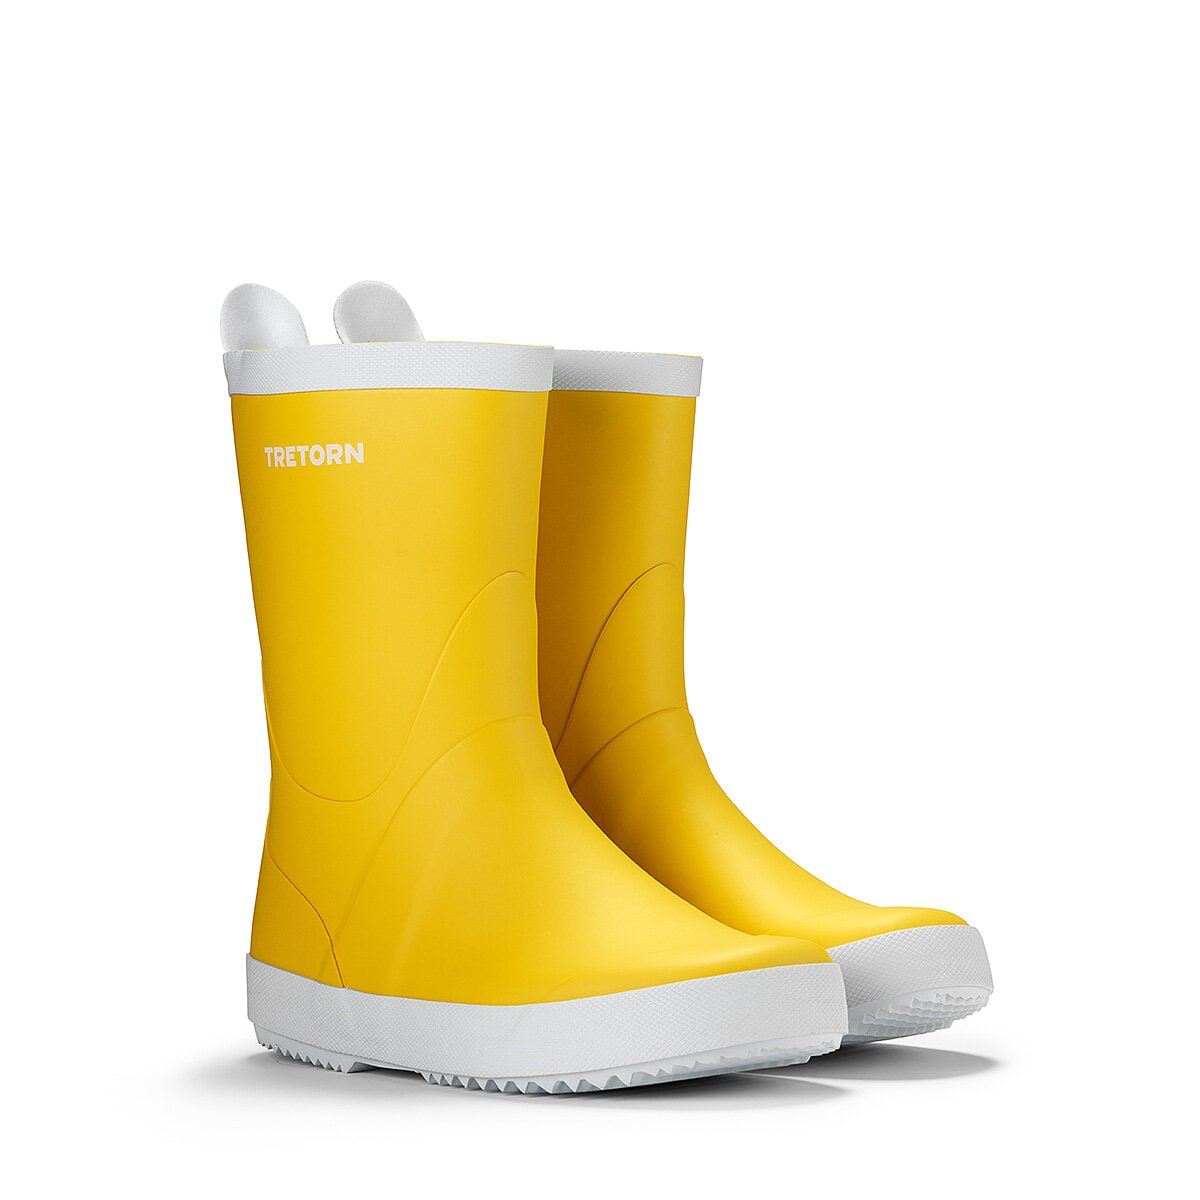 Wings rubber boots by Tretorn for men and women in the colour yellow